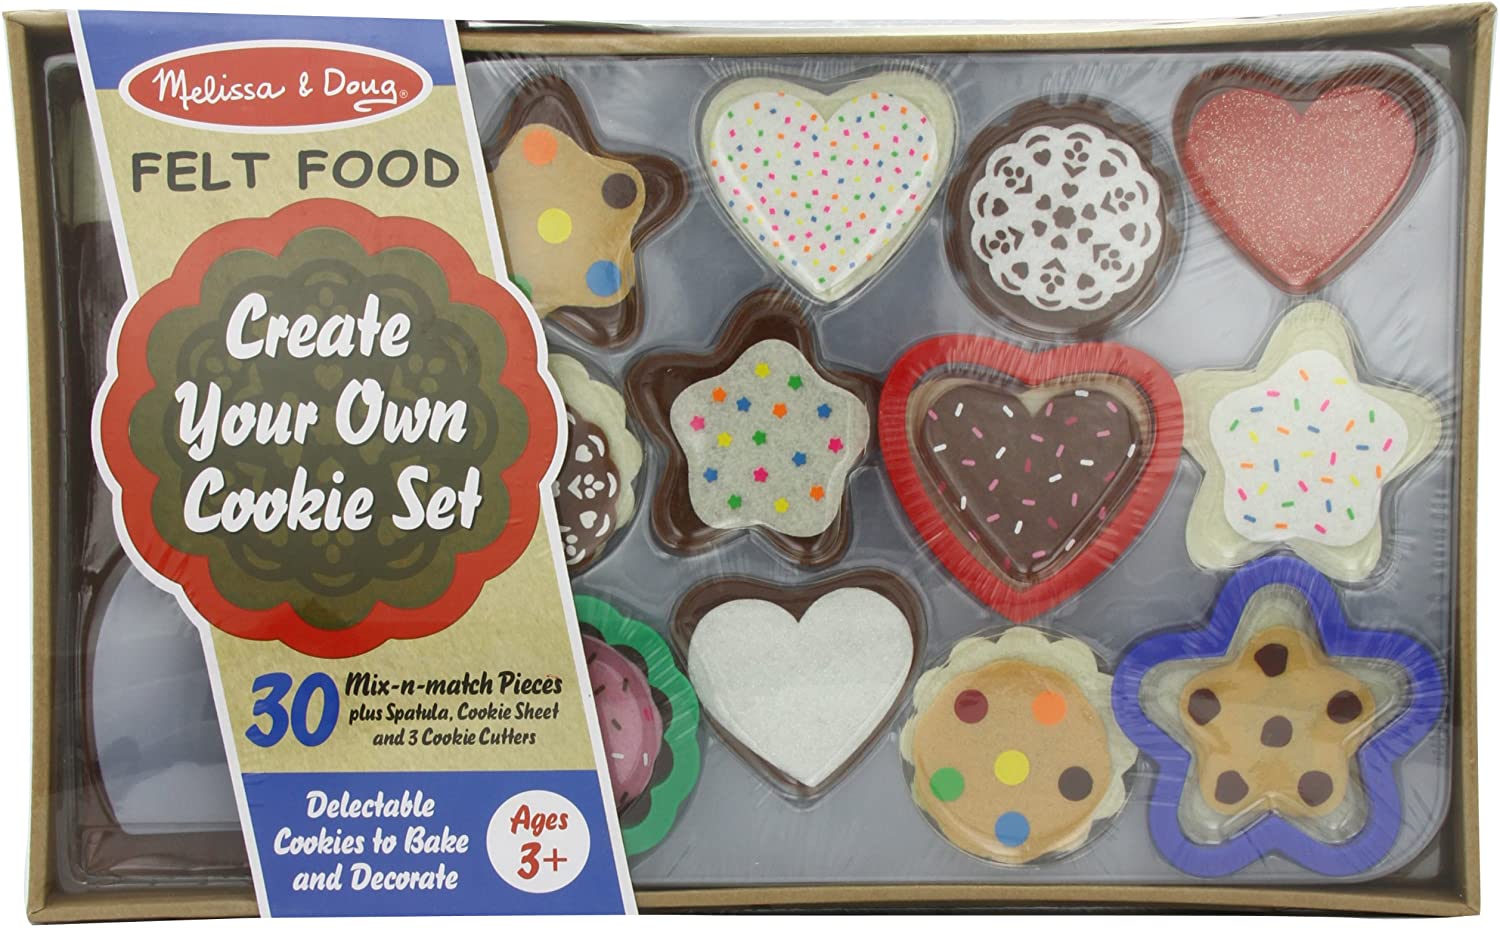 Melissa & Doug Slice and Bake Wooden Cookie Play Food Set - Pretend Cookies  And Baking Sheet, Wooden Play Food Set, Toy Baking Set For Kids Ages 3+